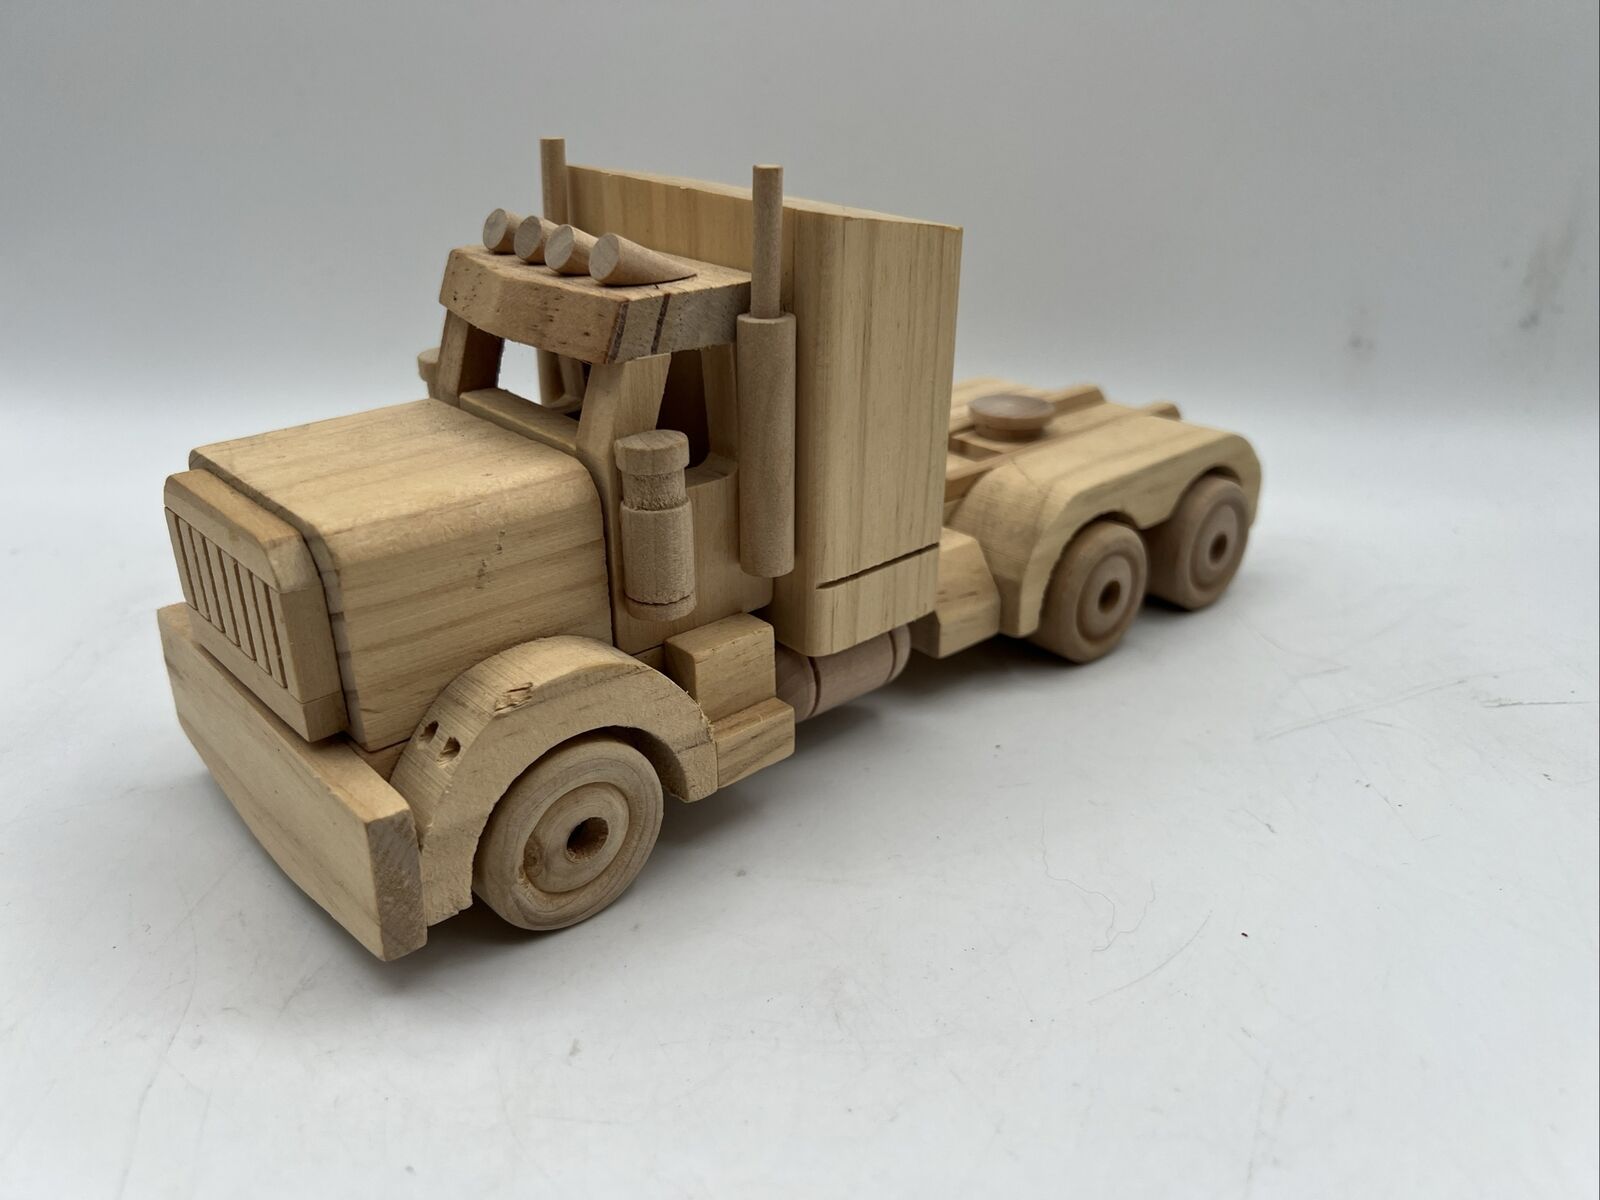 Handcrafted Wooden Semi Big Rig Truck Toy 10” Long